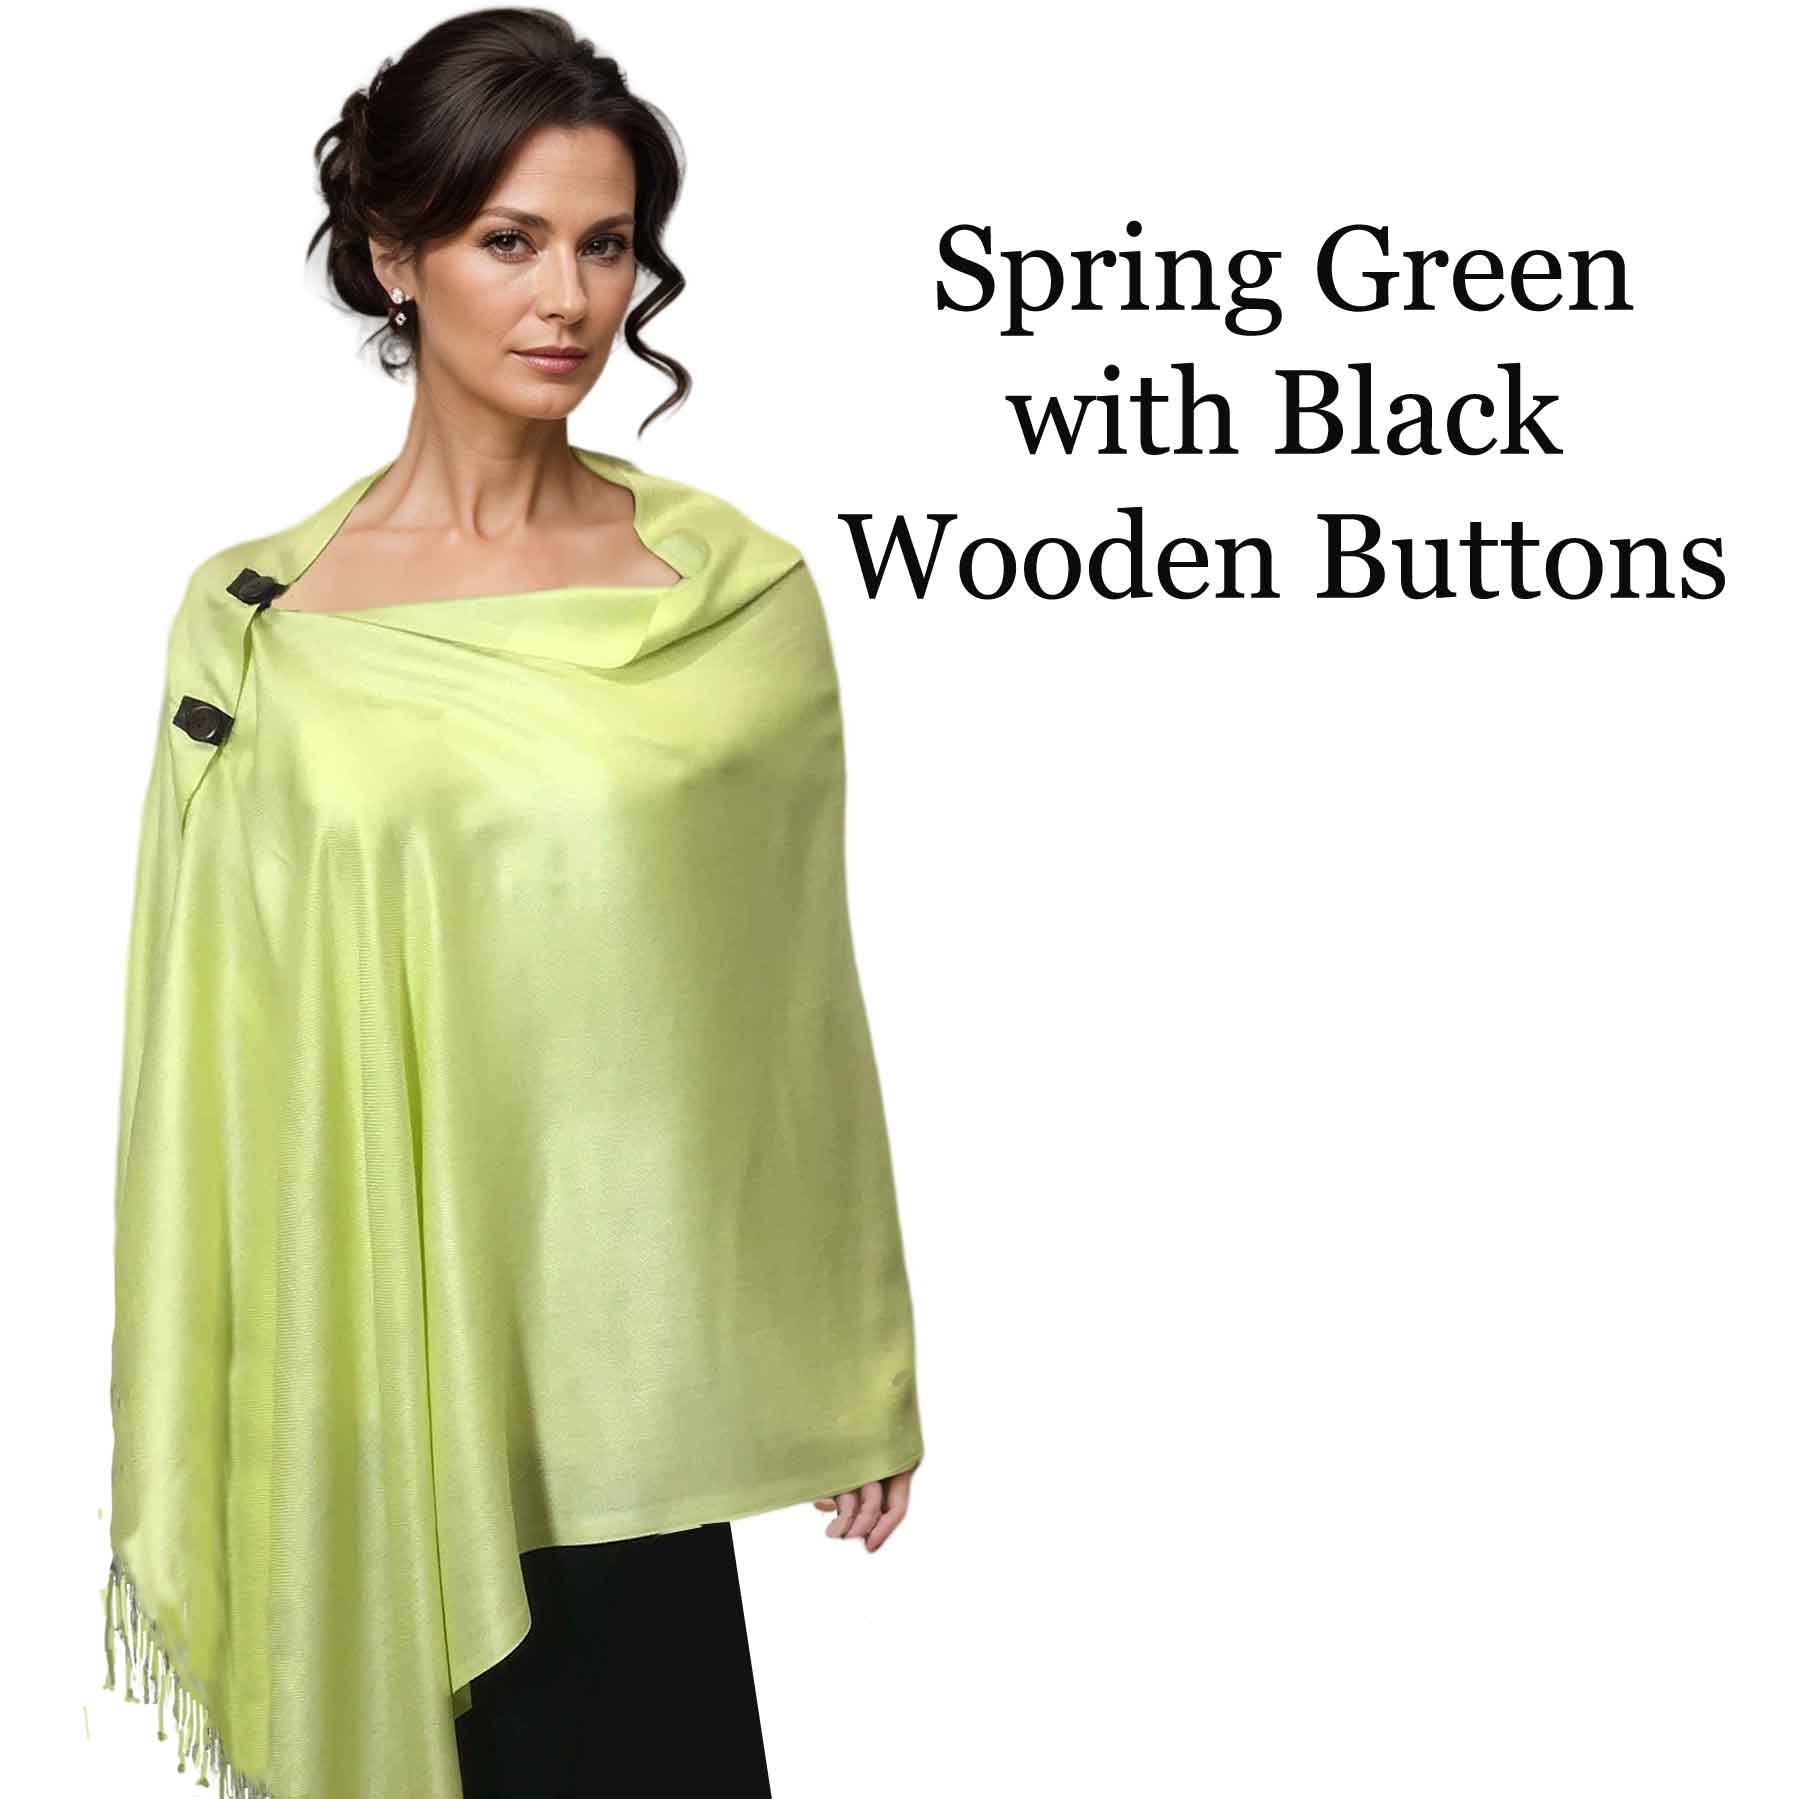 3866 - Pashmina Style Solid Color Button Shawls 3109 - Solid Violet<br>
Pashmina Style Button Shawl - 27